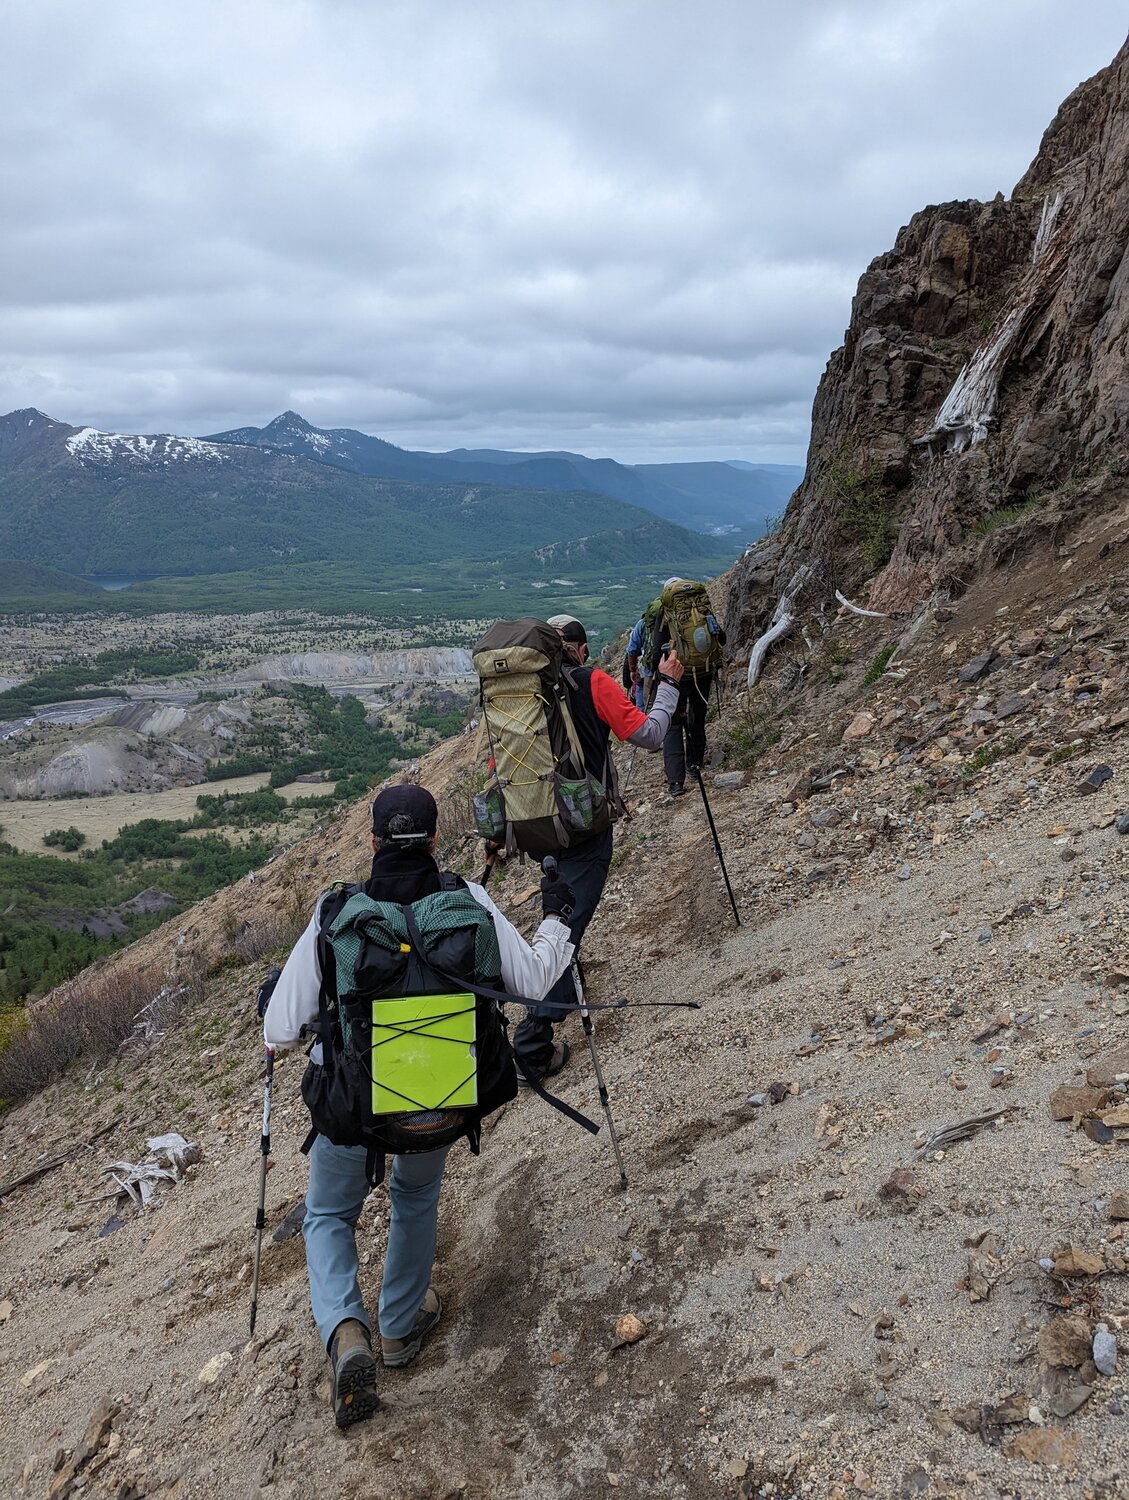 Volunteers hike to the Johnston Ridge Observatory on May 24 to retrieve equipment after a landslide earlier this month cut off access to the site.